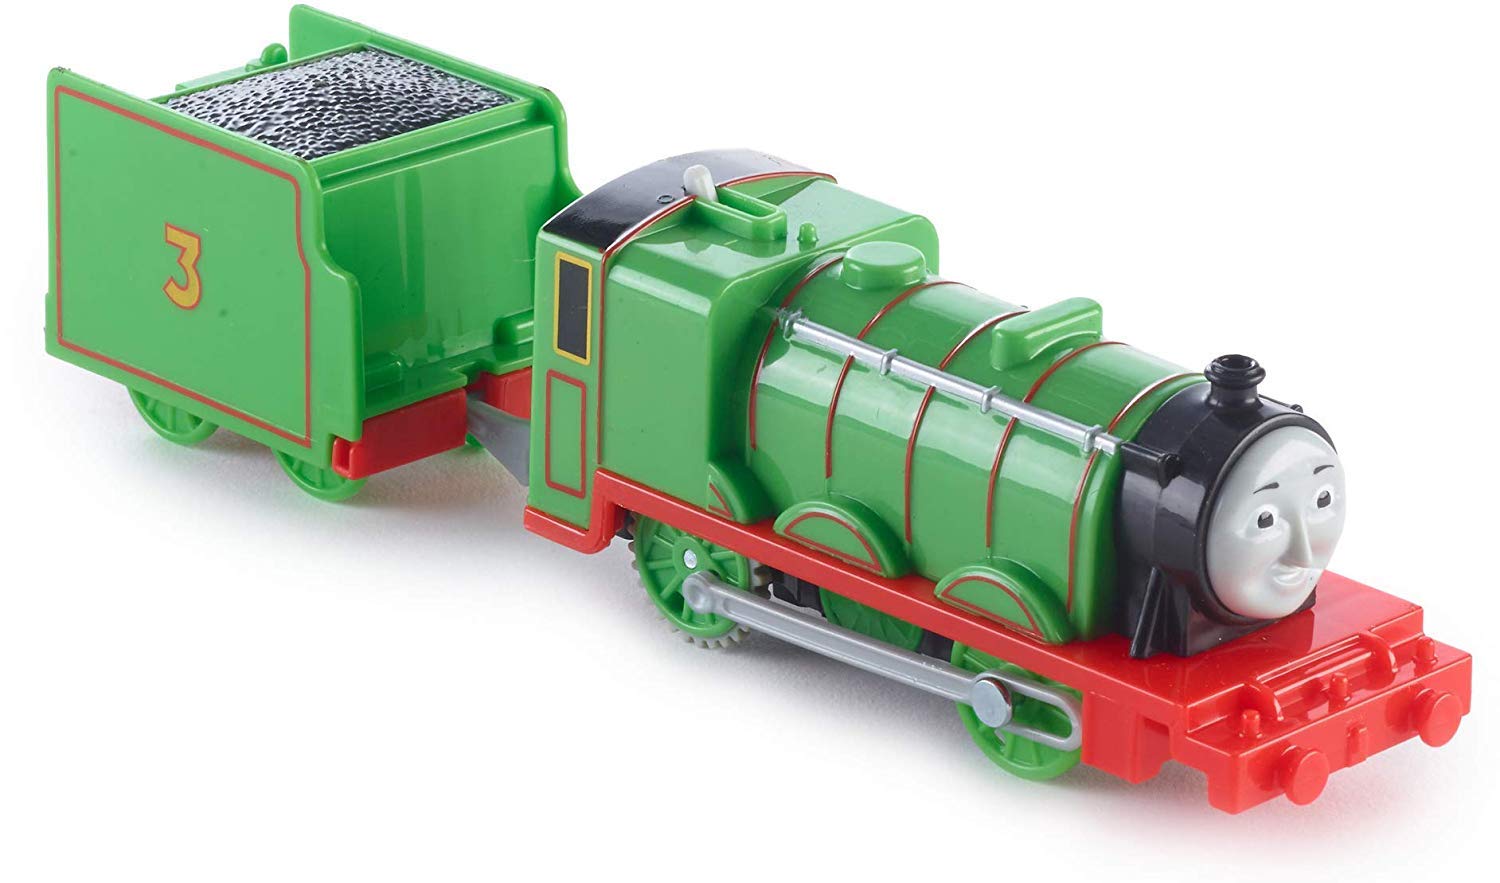 Thomas & Friends Multi-Pack of Motorized Toy Trains